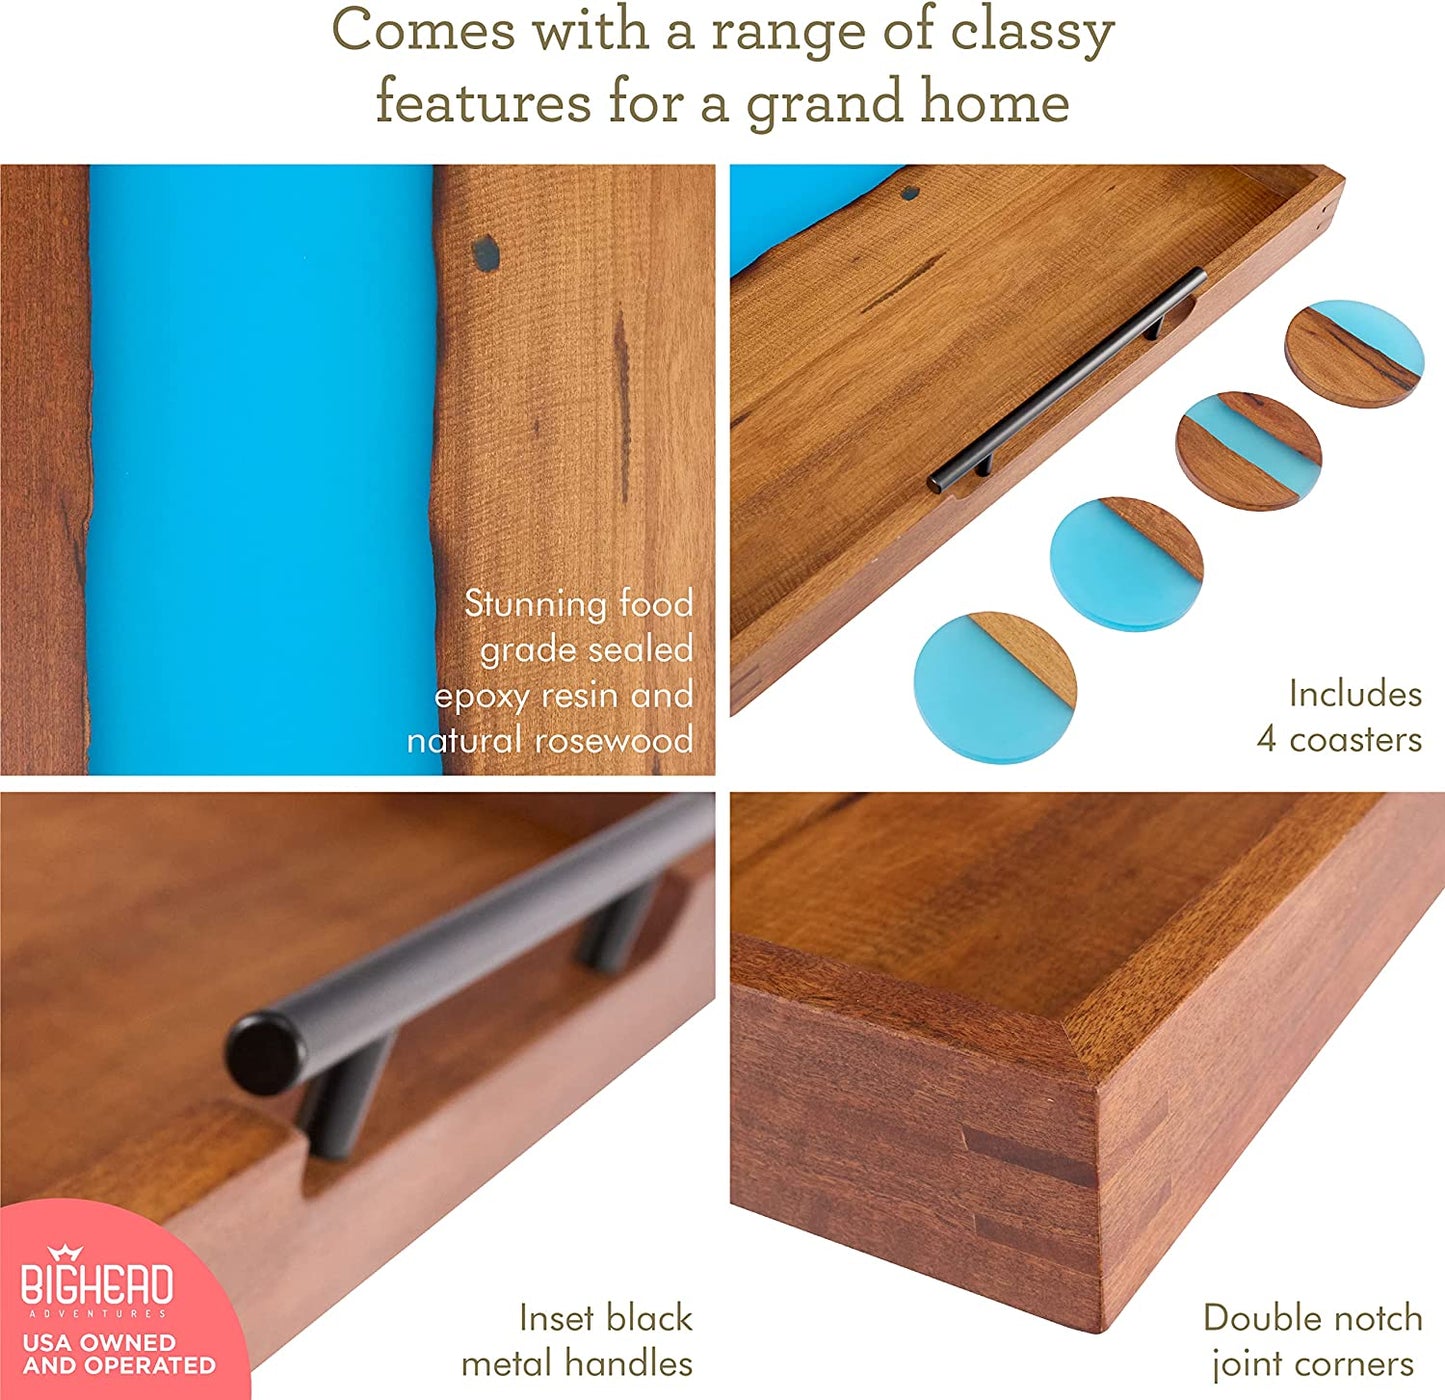 Bighead Epoxy Serving Tray Rosewood Tray with Glowing Epoxy Resin- Large Sized Epoxy Wooden Tray-Ocean Inspired Resin Serving Tray for Home Decor Coffee Tray-with 4 Coaster Set- (Luminous Blue Rosewood)